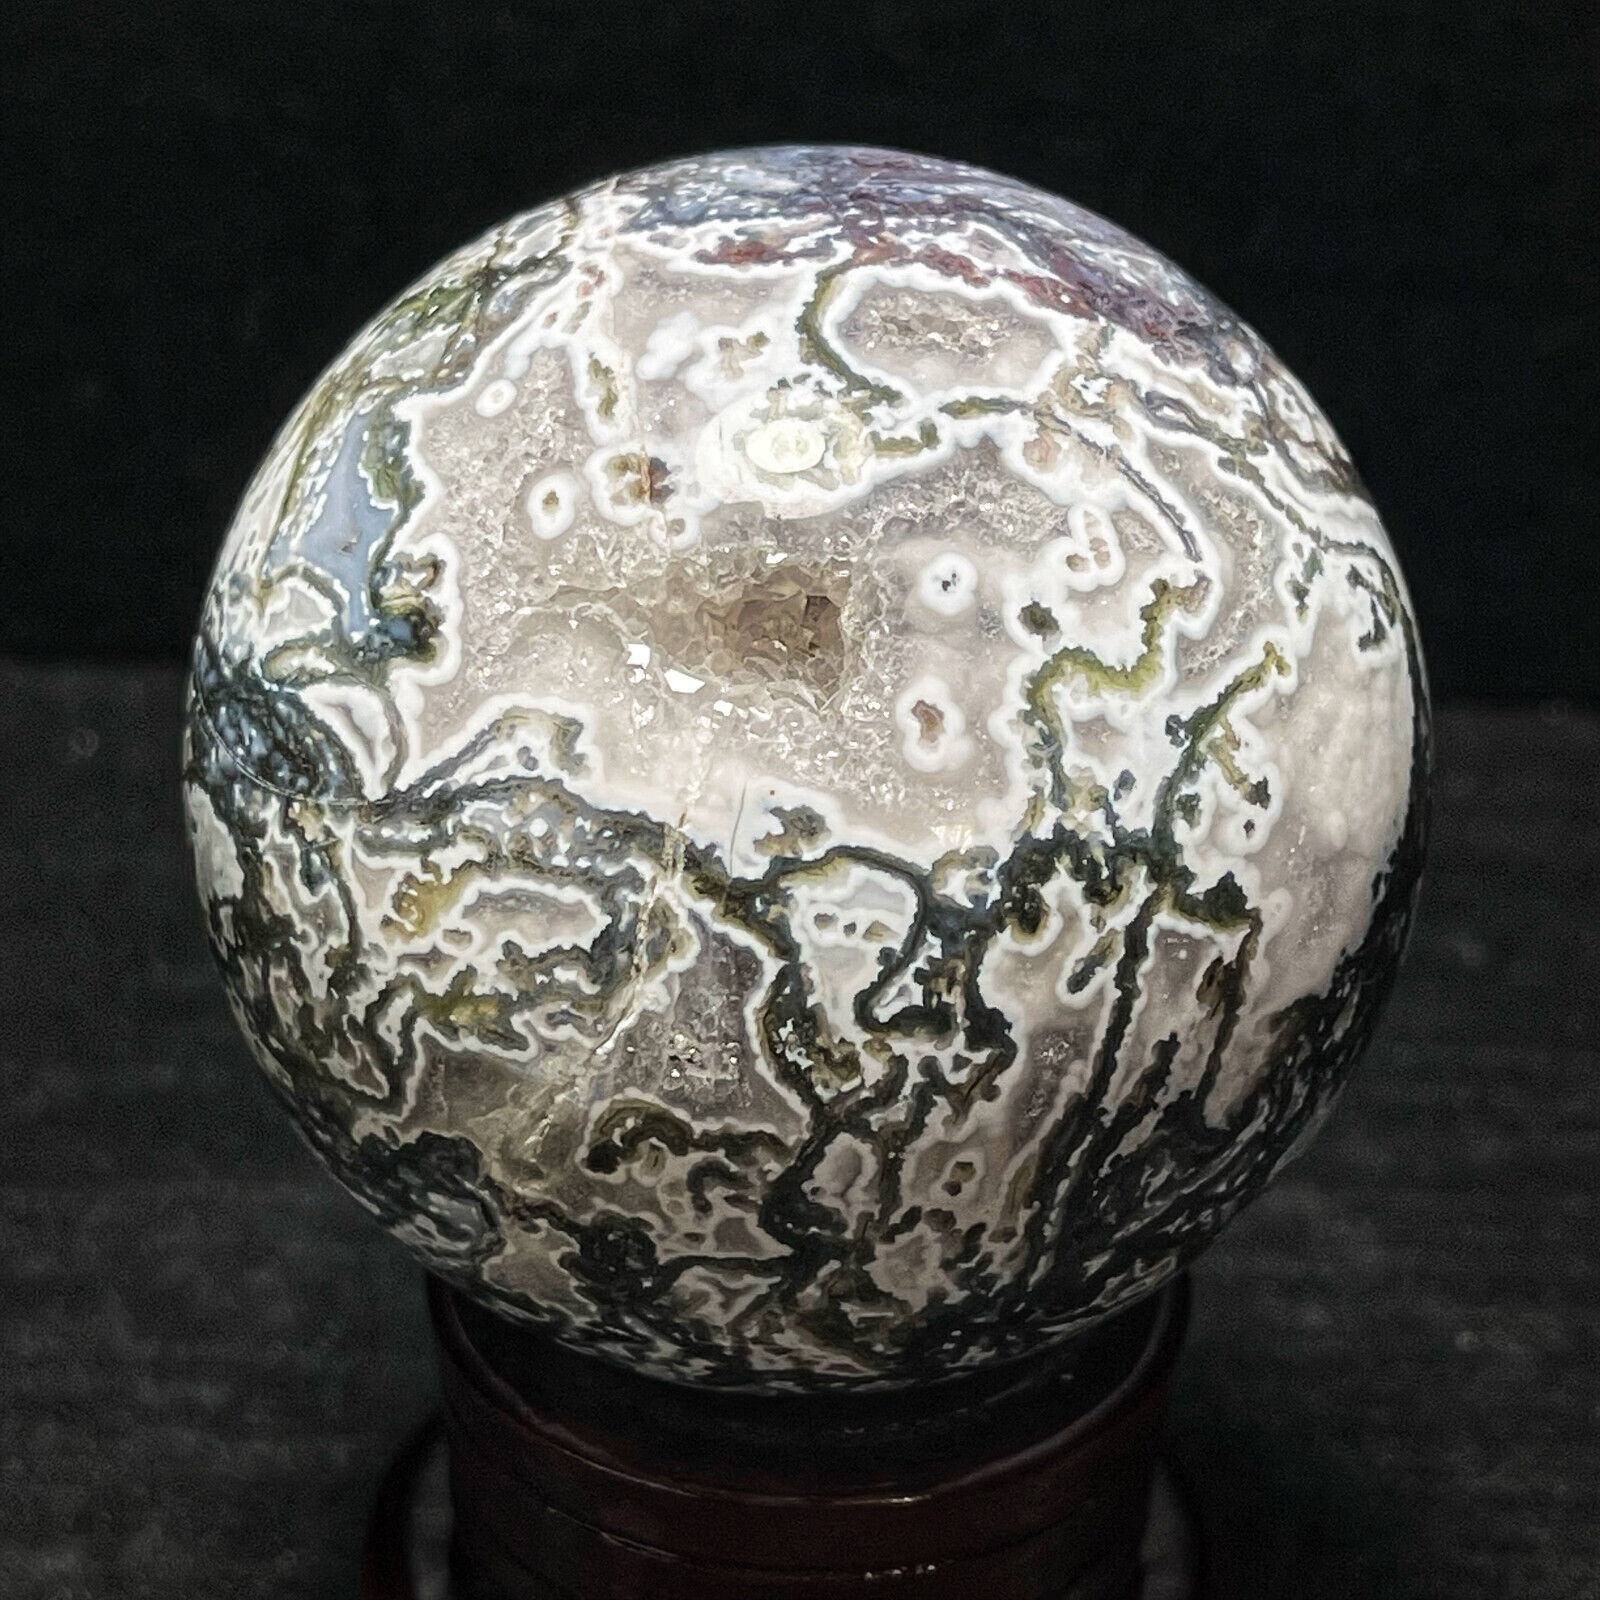 TOP 434G Natural Polished Moss Agate Crystal Sphere Ball Healing A367